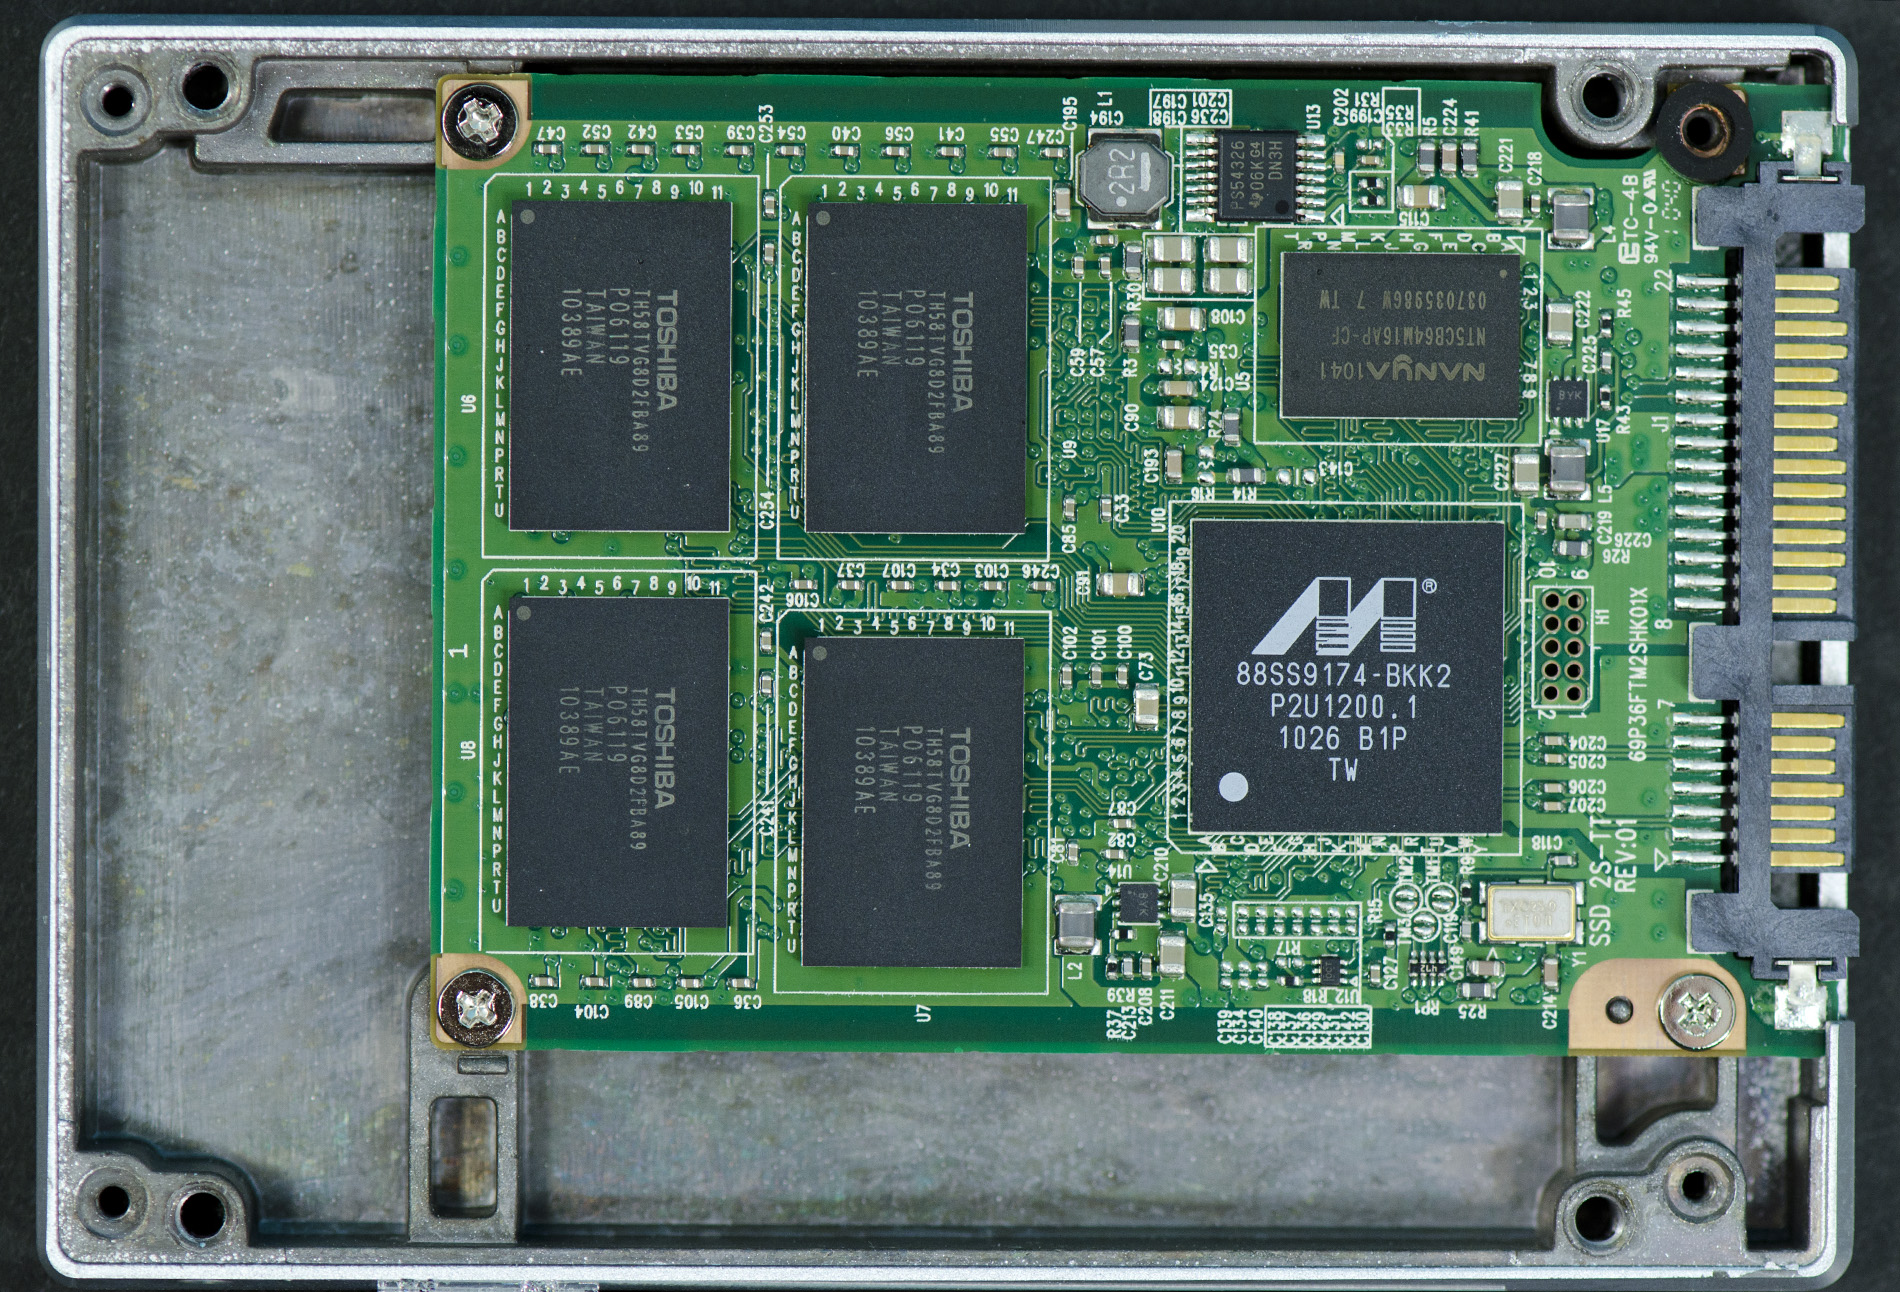 Martyr Perpetual Til meditation Intel's SSD 510 Powered by Marvell - The Intel SSD 510 Review